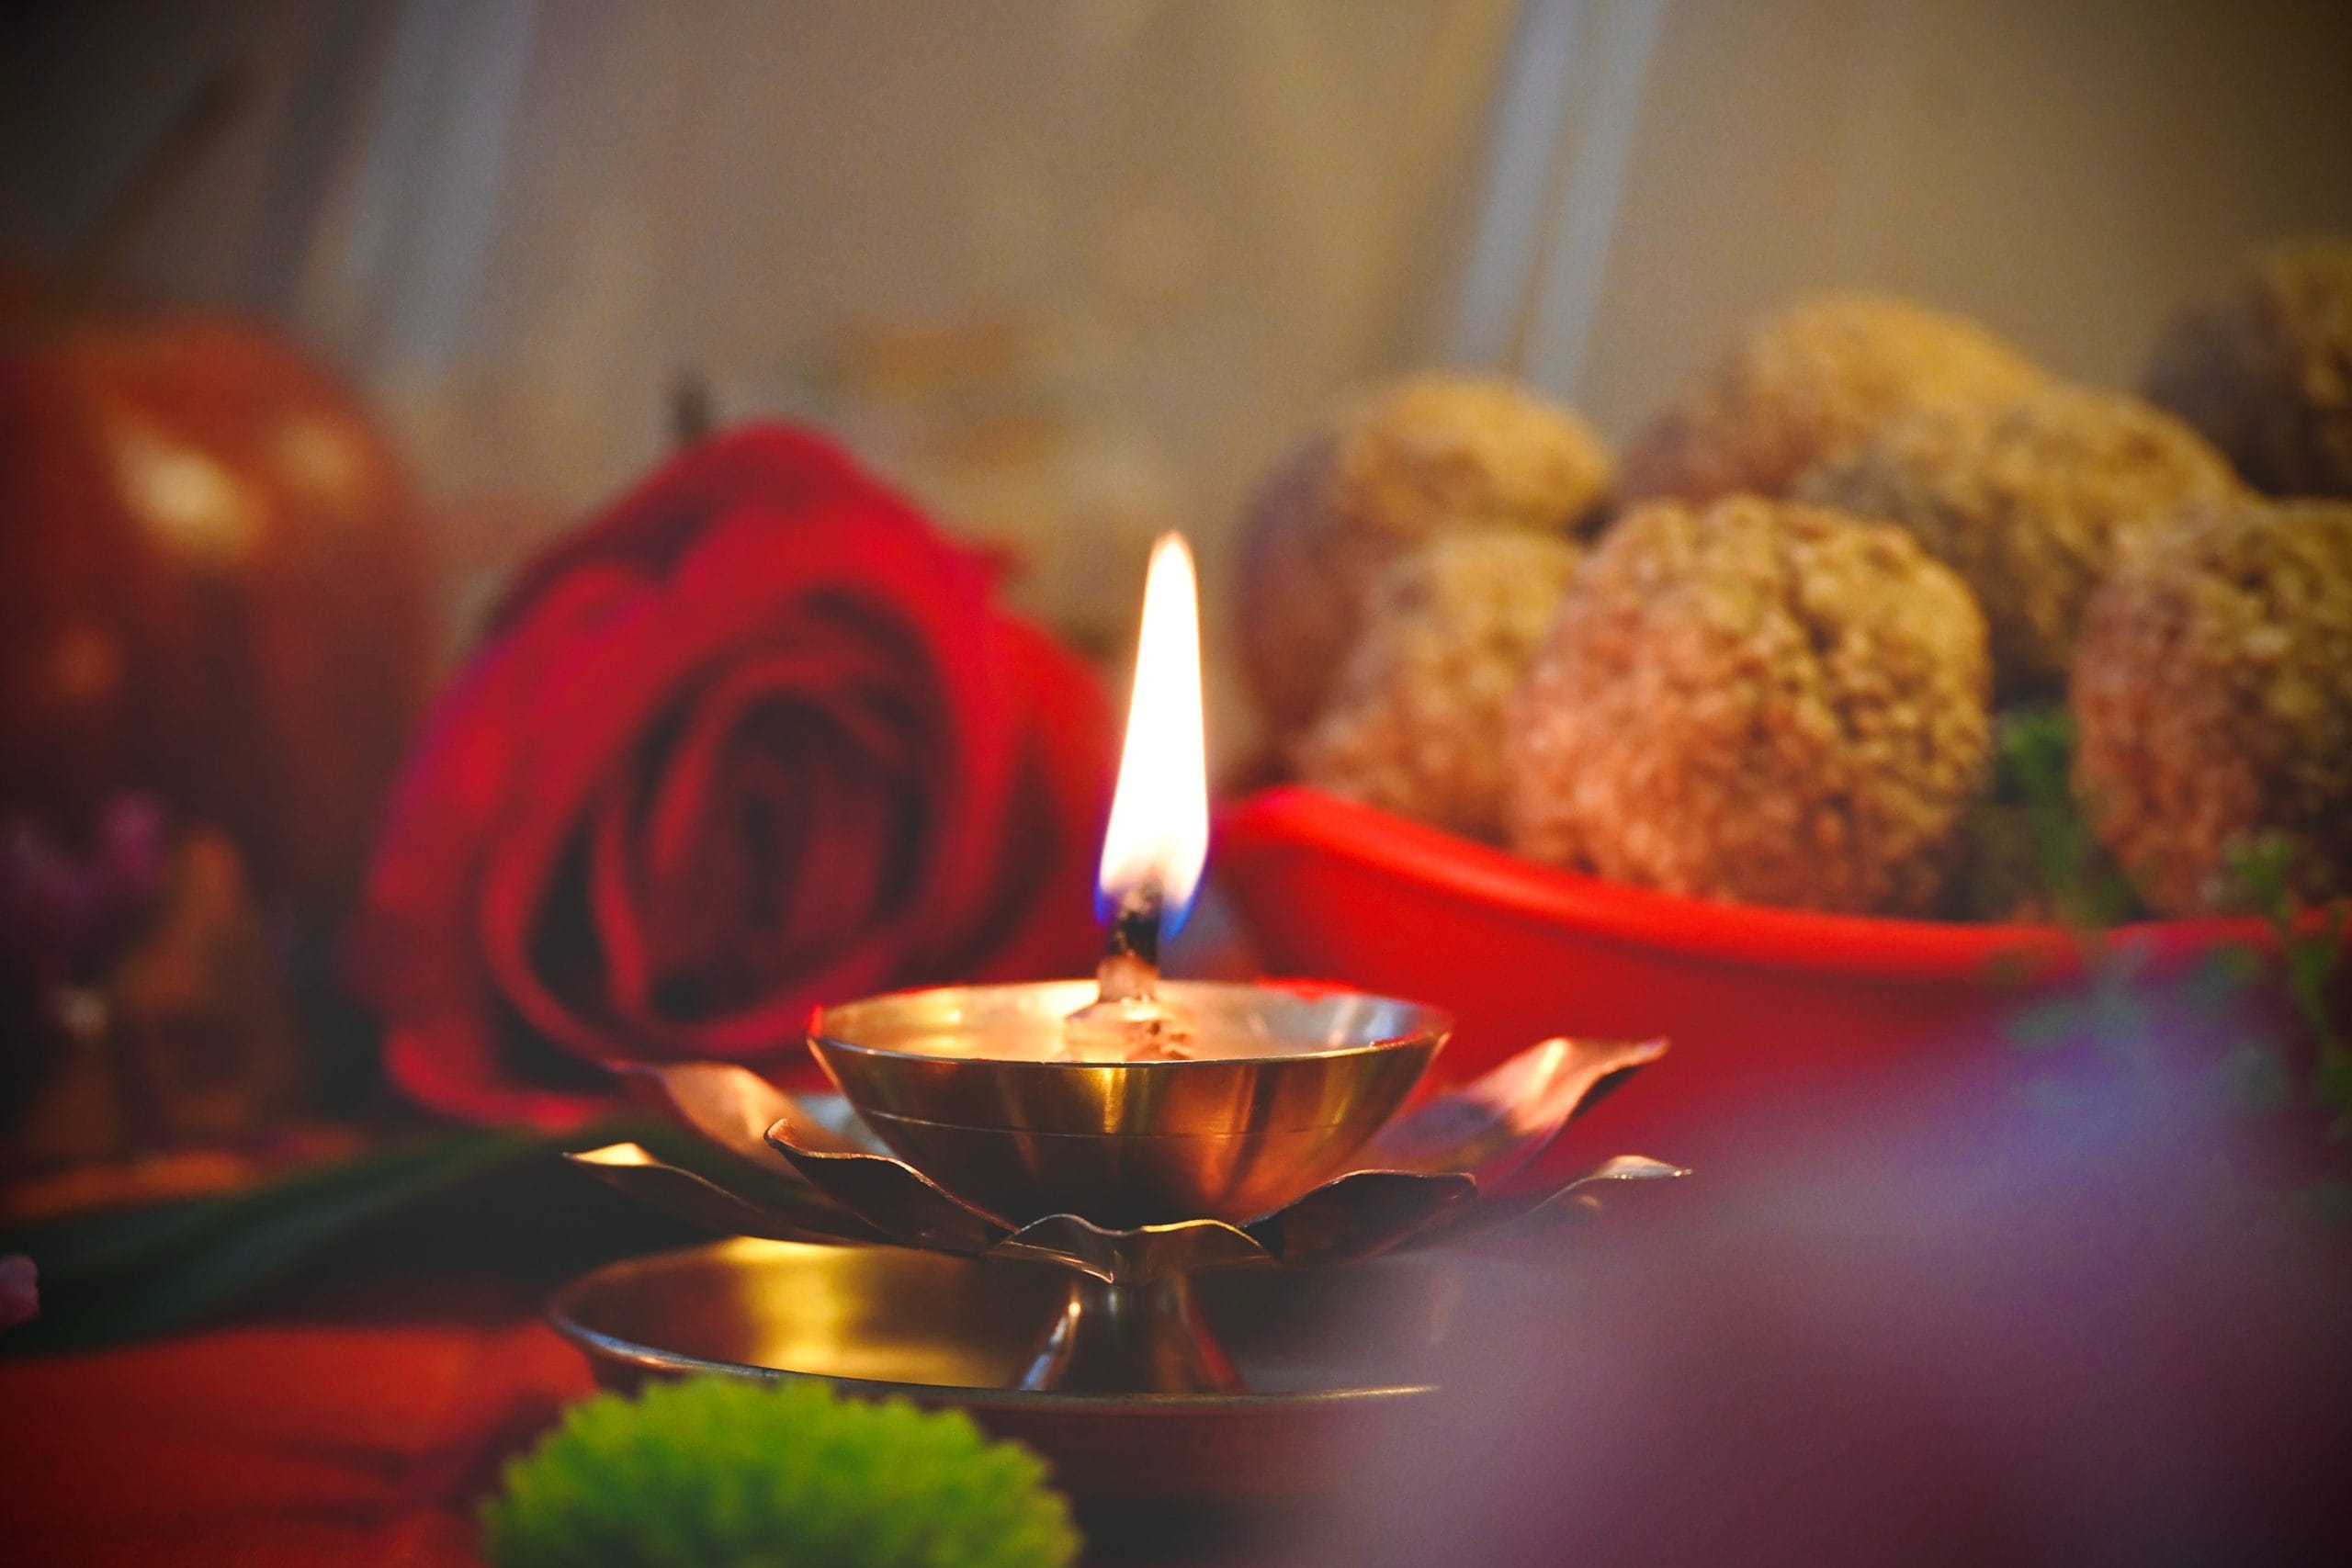 Which goddess is worshipped on Day 1 of Diwali?